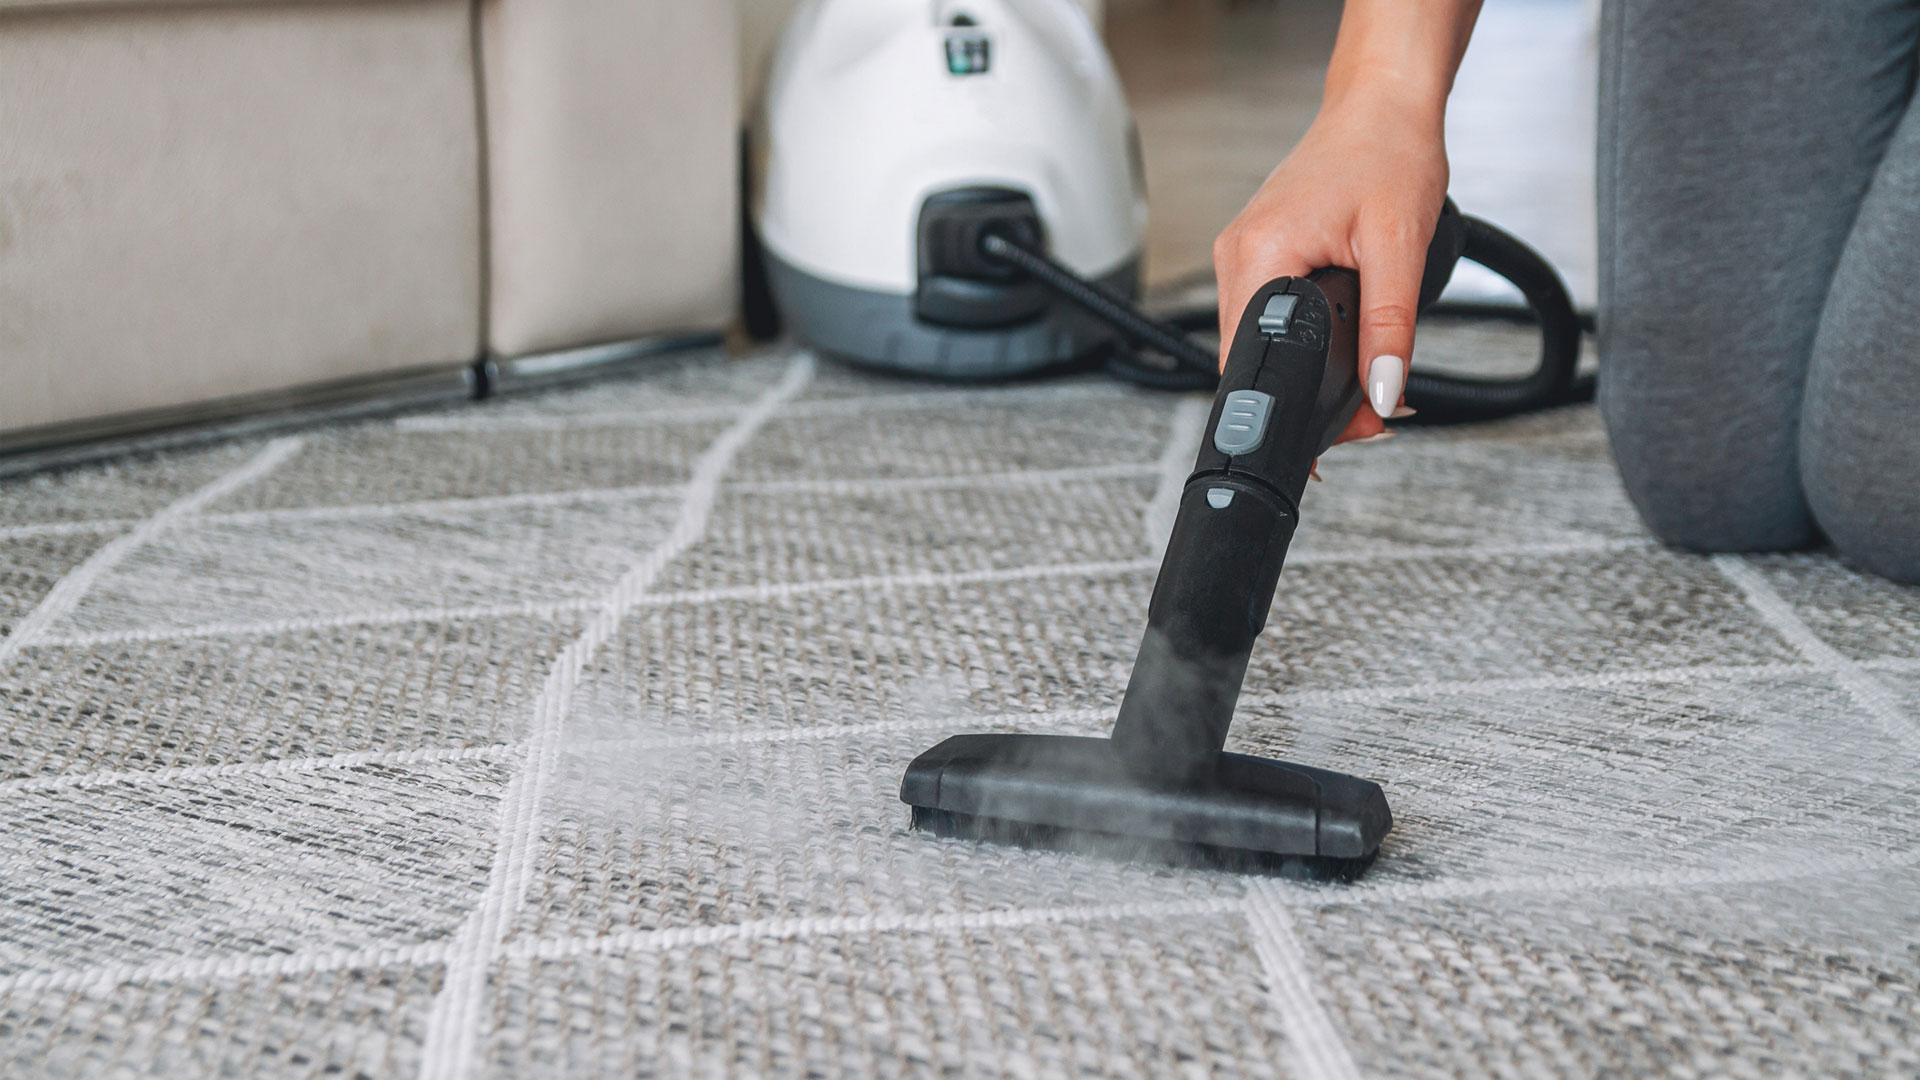 How to remove carpet mold: The picture shows the steam cleaner cleaning the carpet